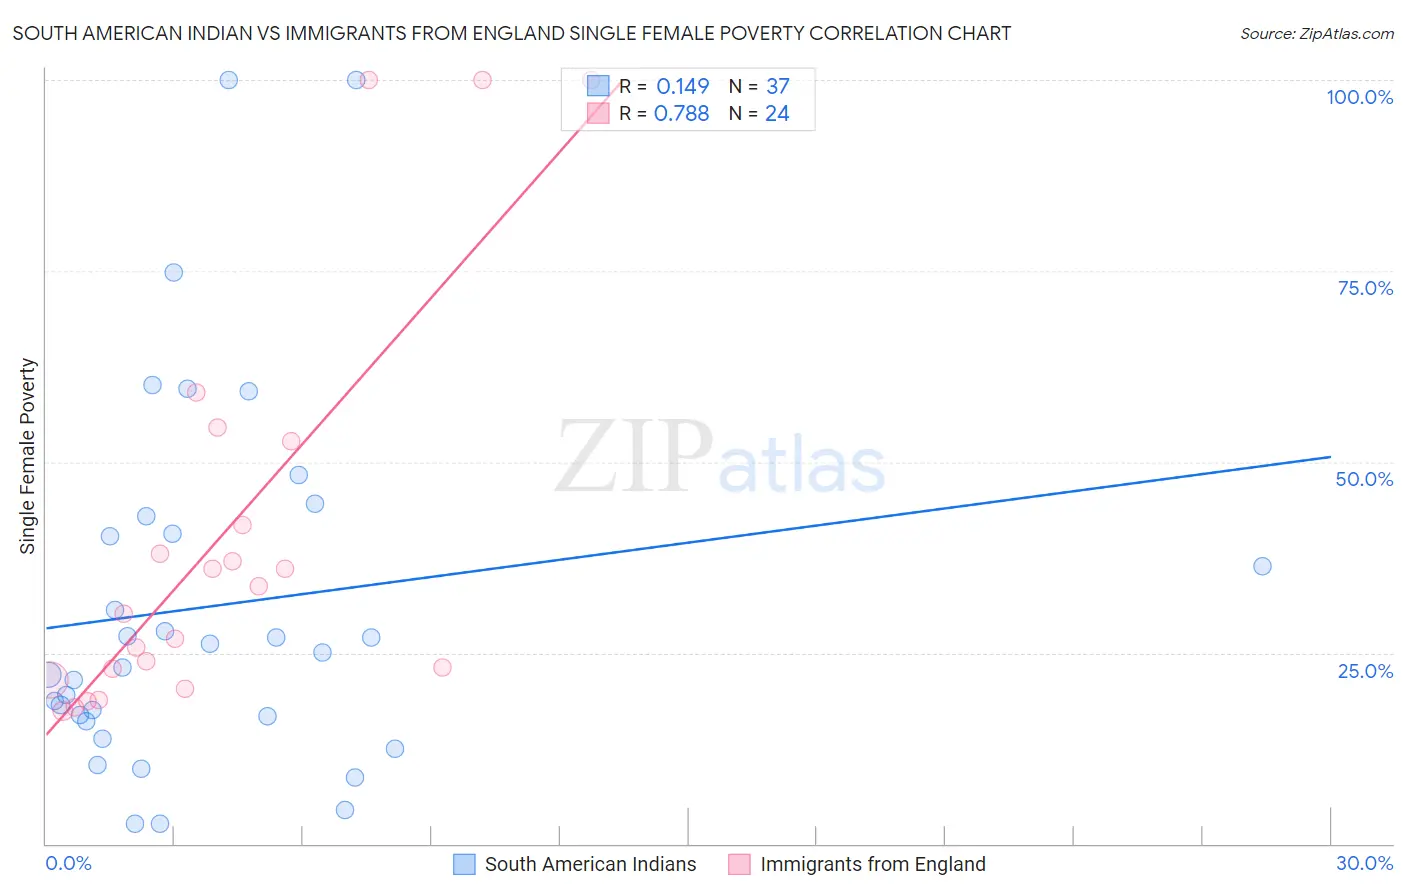 South American Indian vs Immigrants from England Single Female Poverty